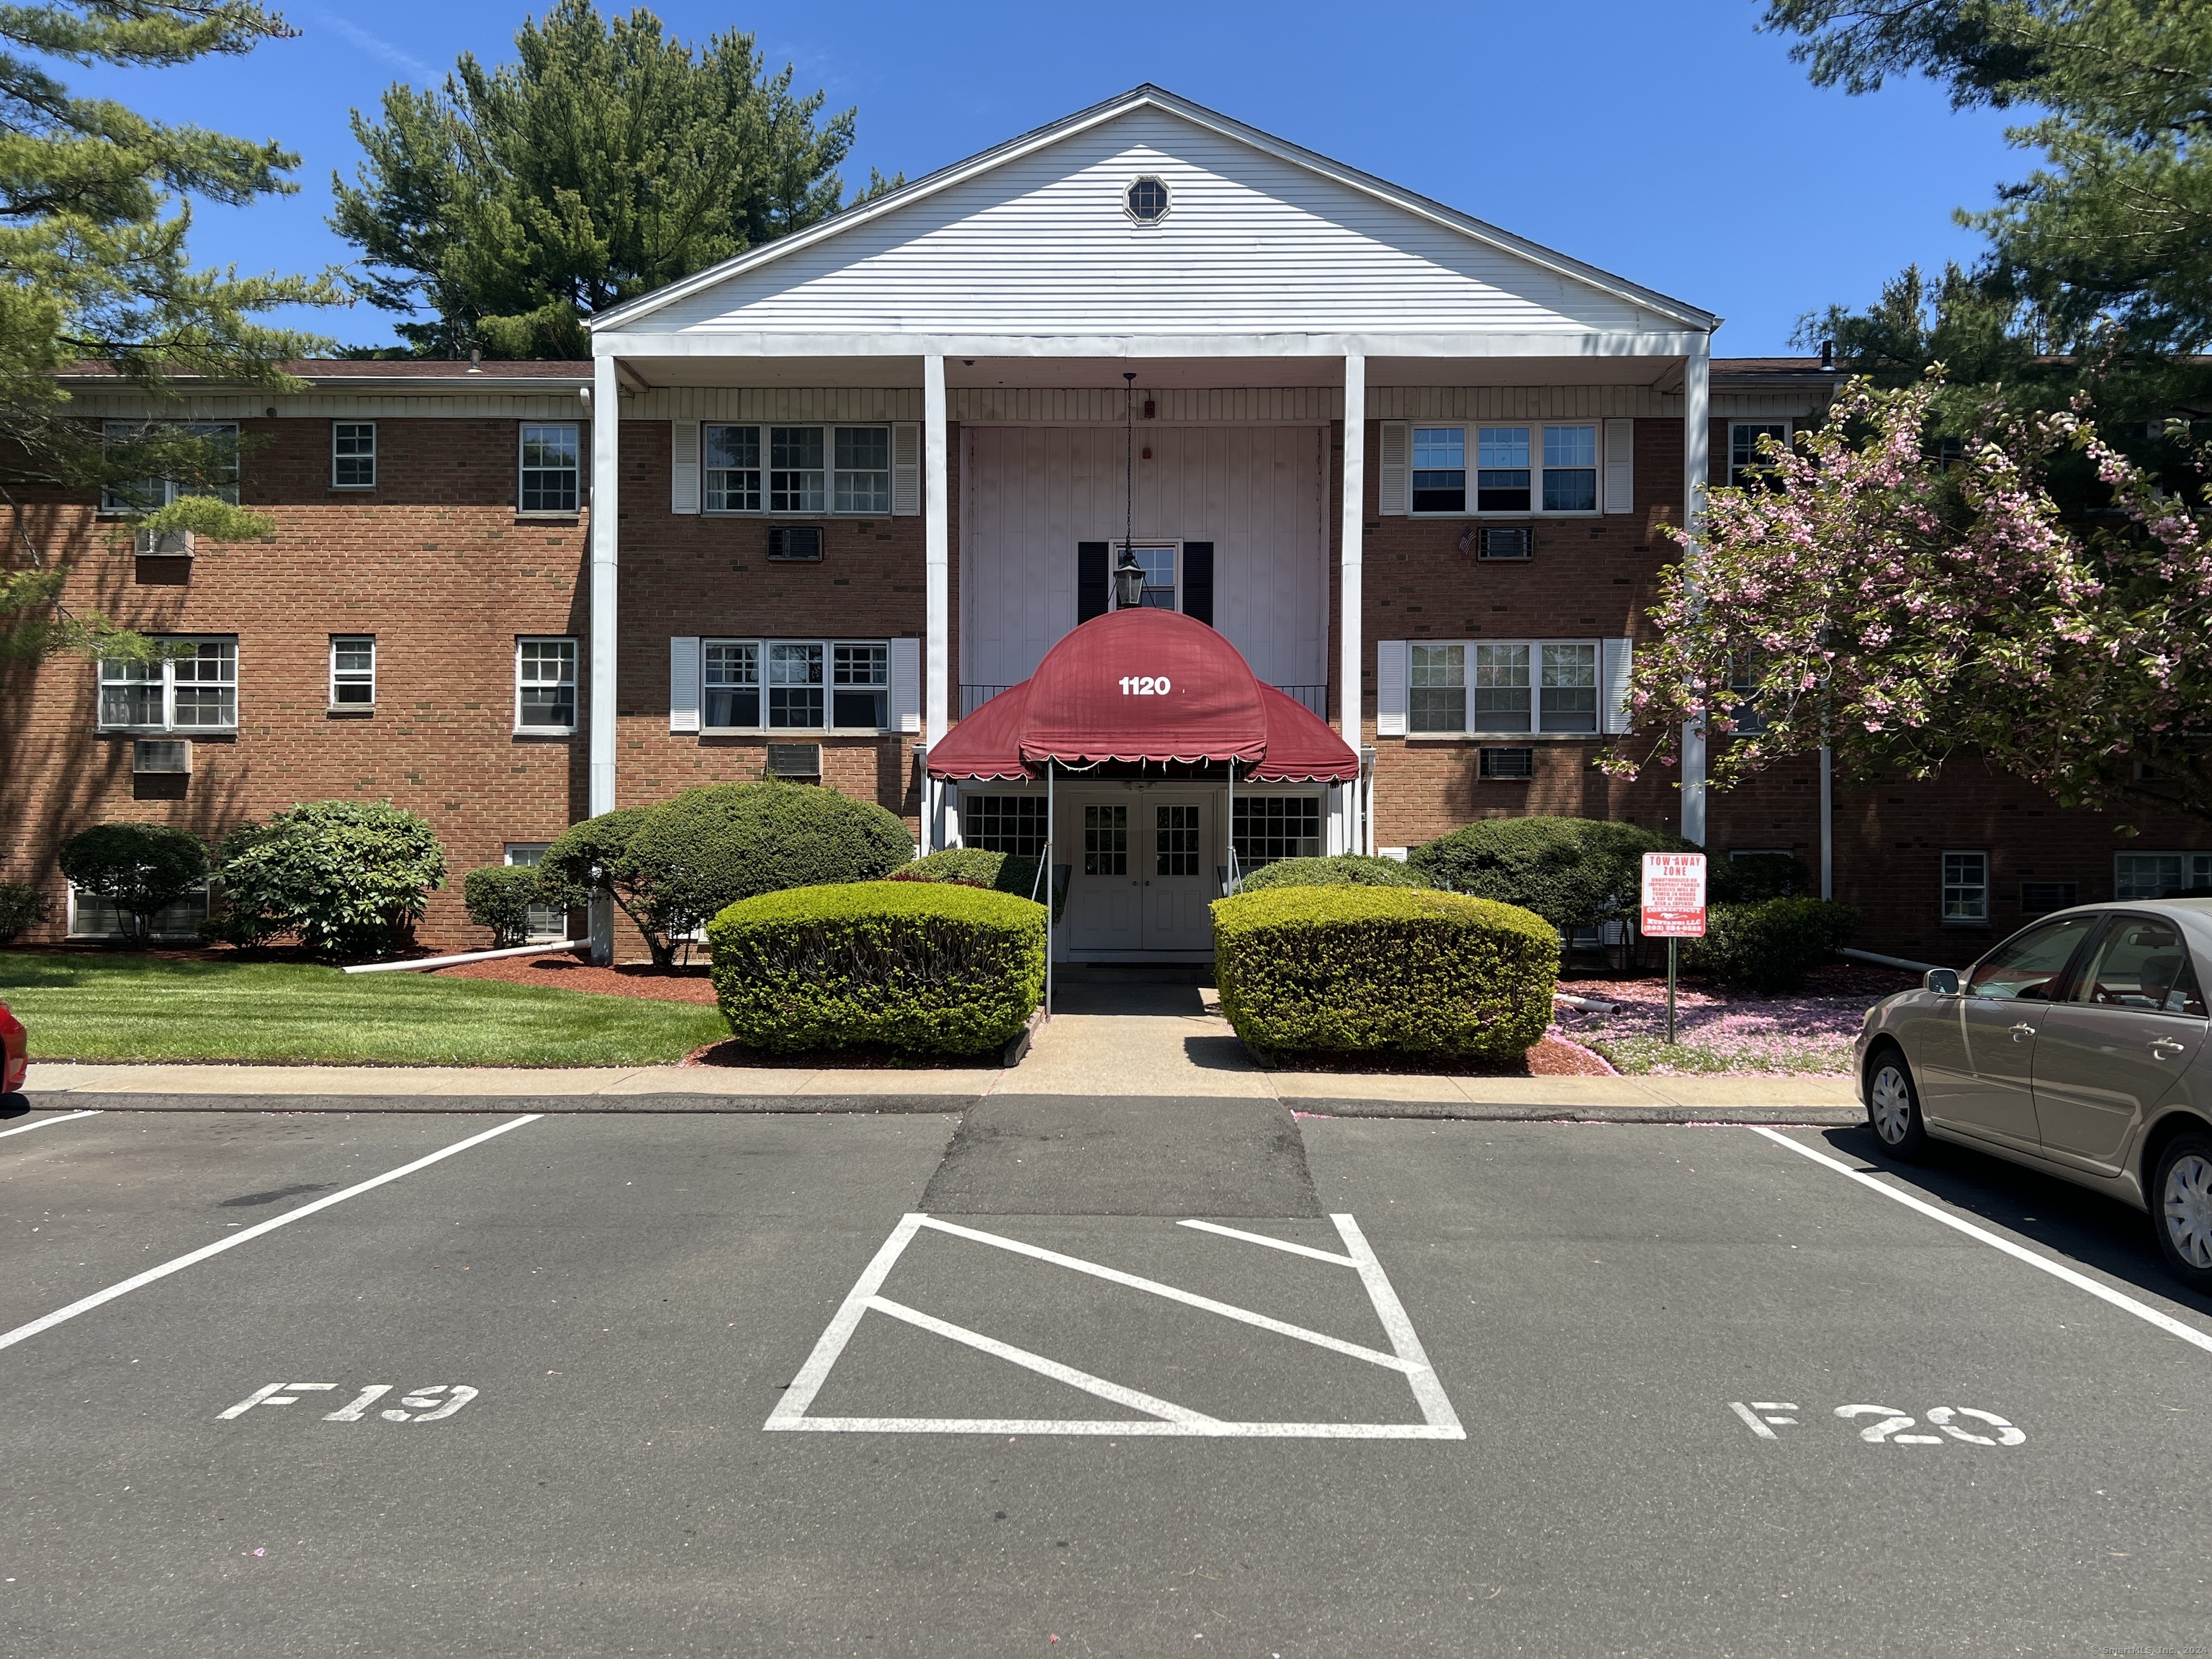 Rental Property at 1120 New Haven Avenue 137, Milford, Connecticut - Bedrooms: 1 
Bathrooms: 1 
Rooms: 3  - $1,750 MO.